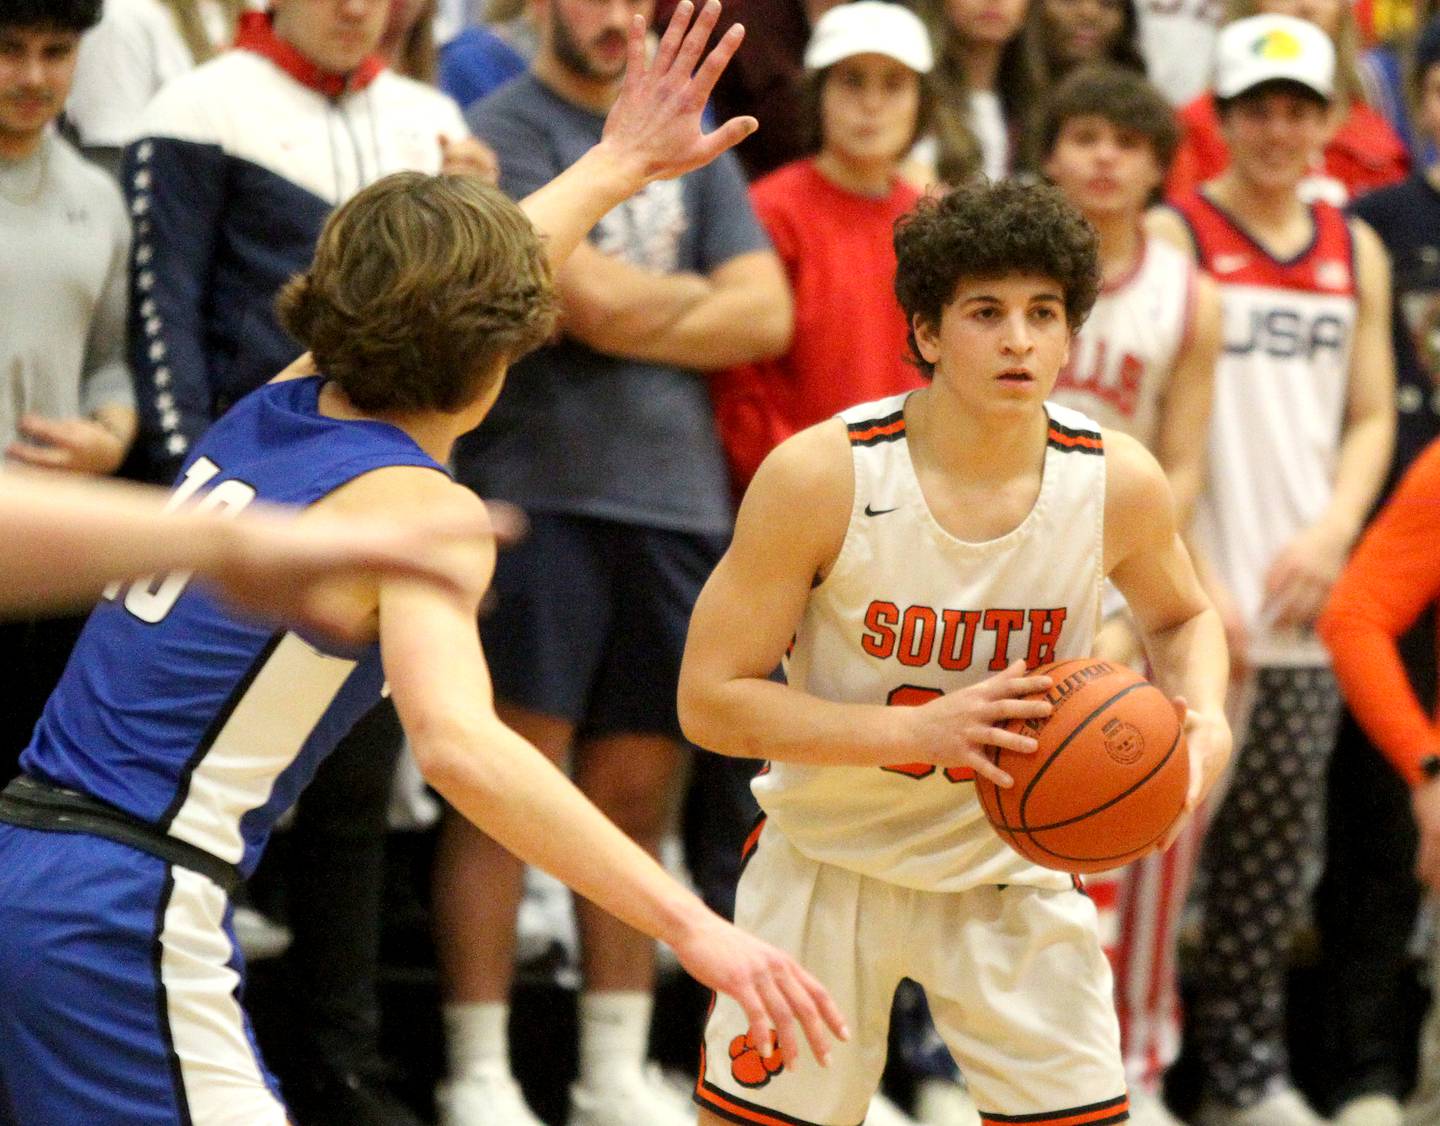 Wheaton Warrenville South’s Luca Carbonaro looks to pass the ball during a game against Geneva in Wheaton on Friday, Jan. 27, 2023.